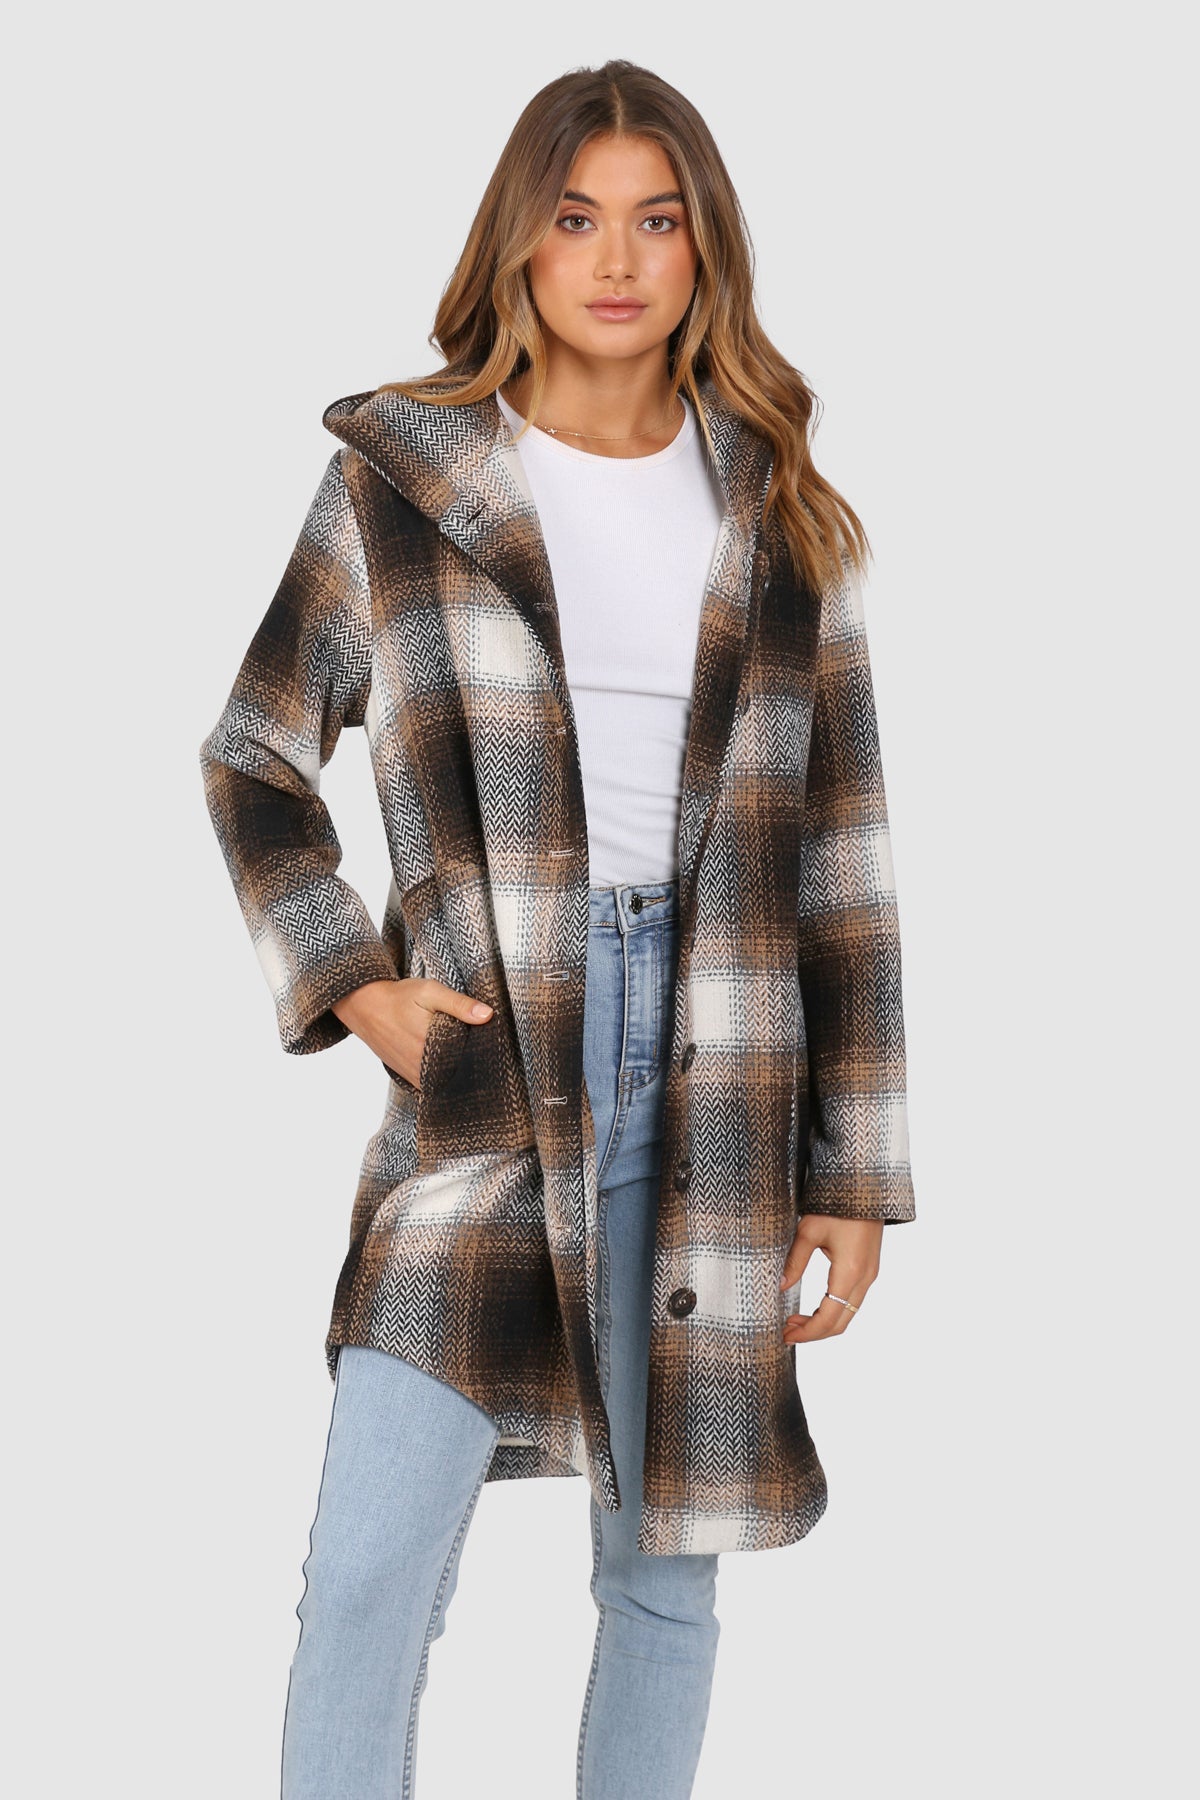 Bailage Haired Caucasian female wearing Plaid Print  Two-oversized front pocket  Relaxed Shoulder  Checkered Lapel Coat  Mid-Length  Buttoned Down  Hooded  Overcoat  Jacket  paired with cotton round neck white tee and high waisted denim jeans